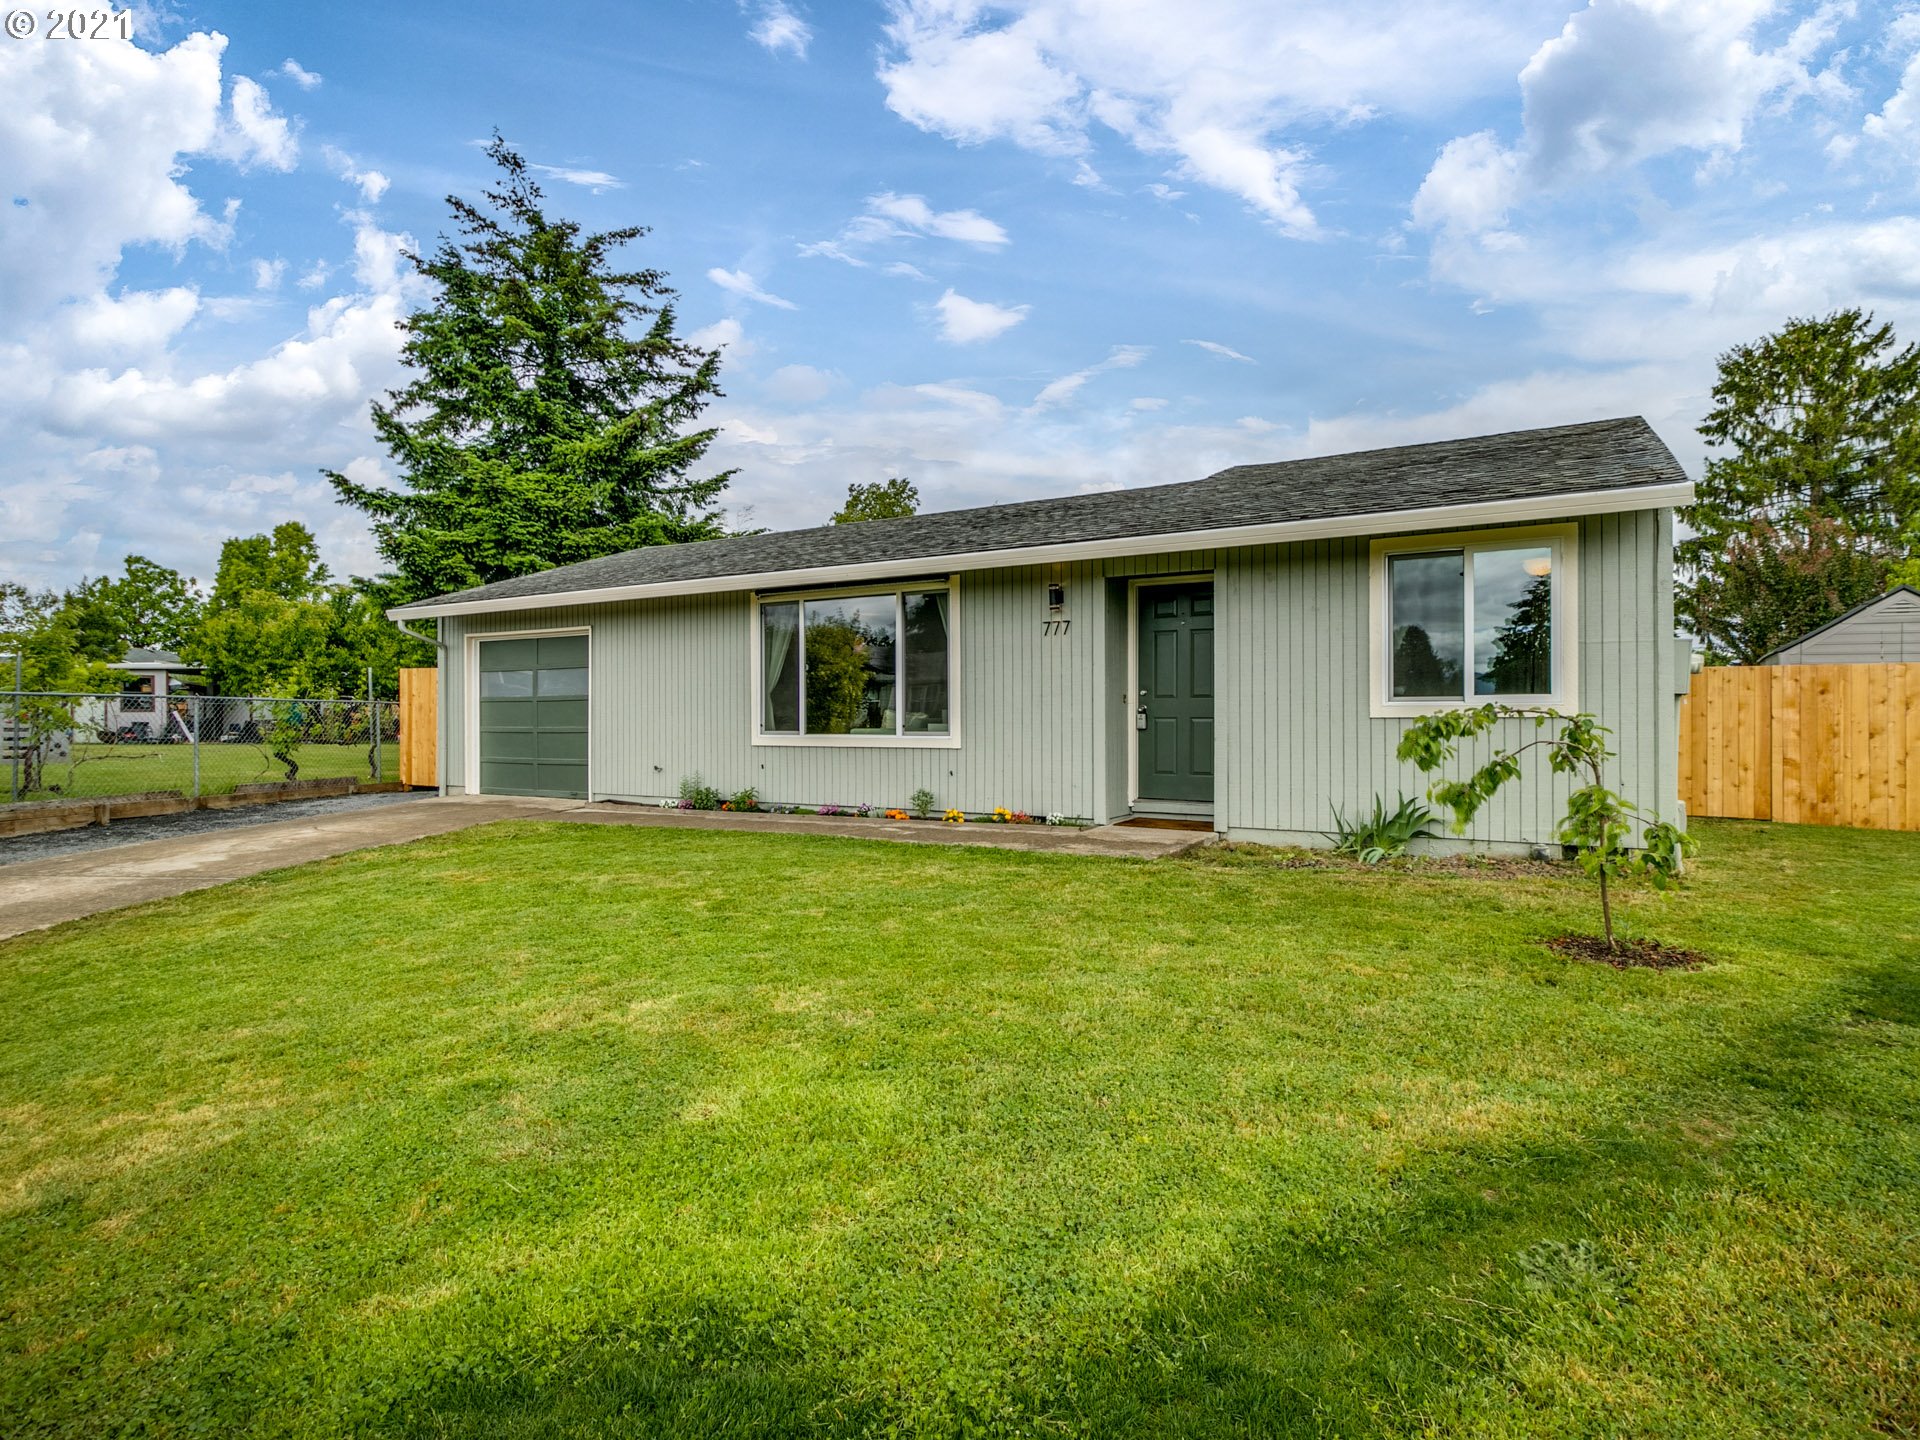 777 S FAWN ST (1 of 31)